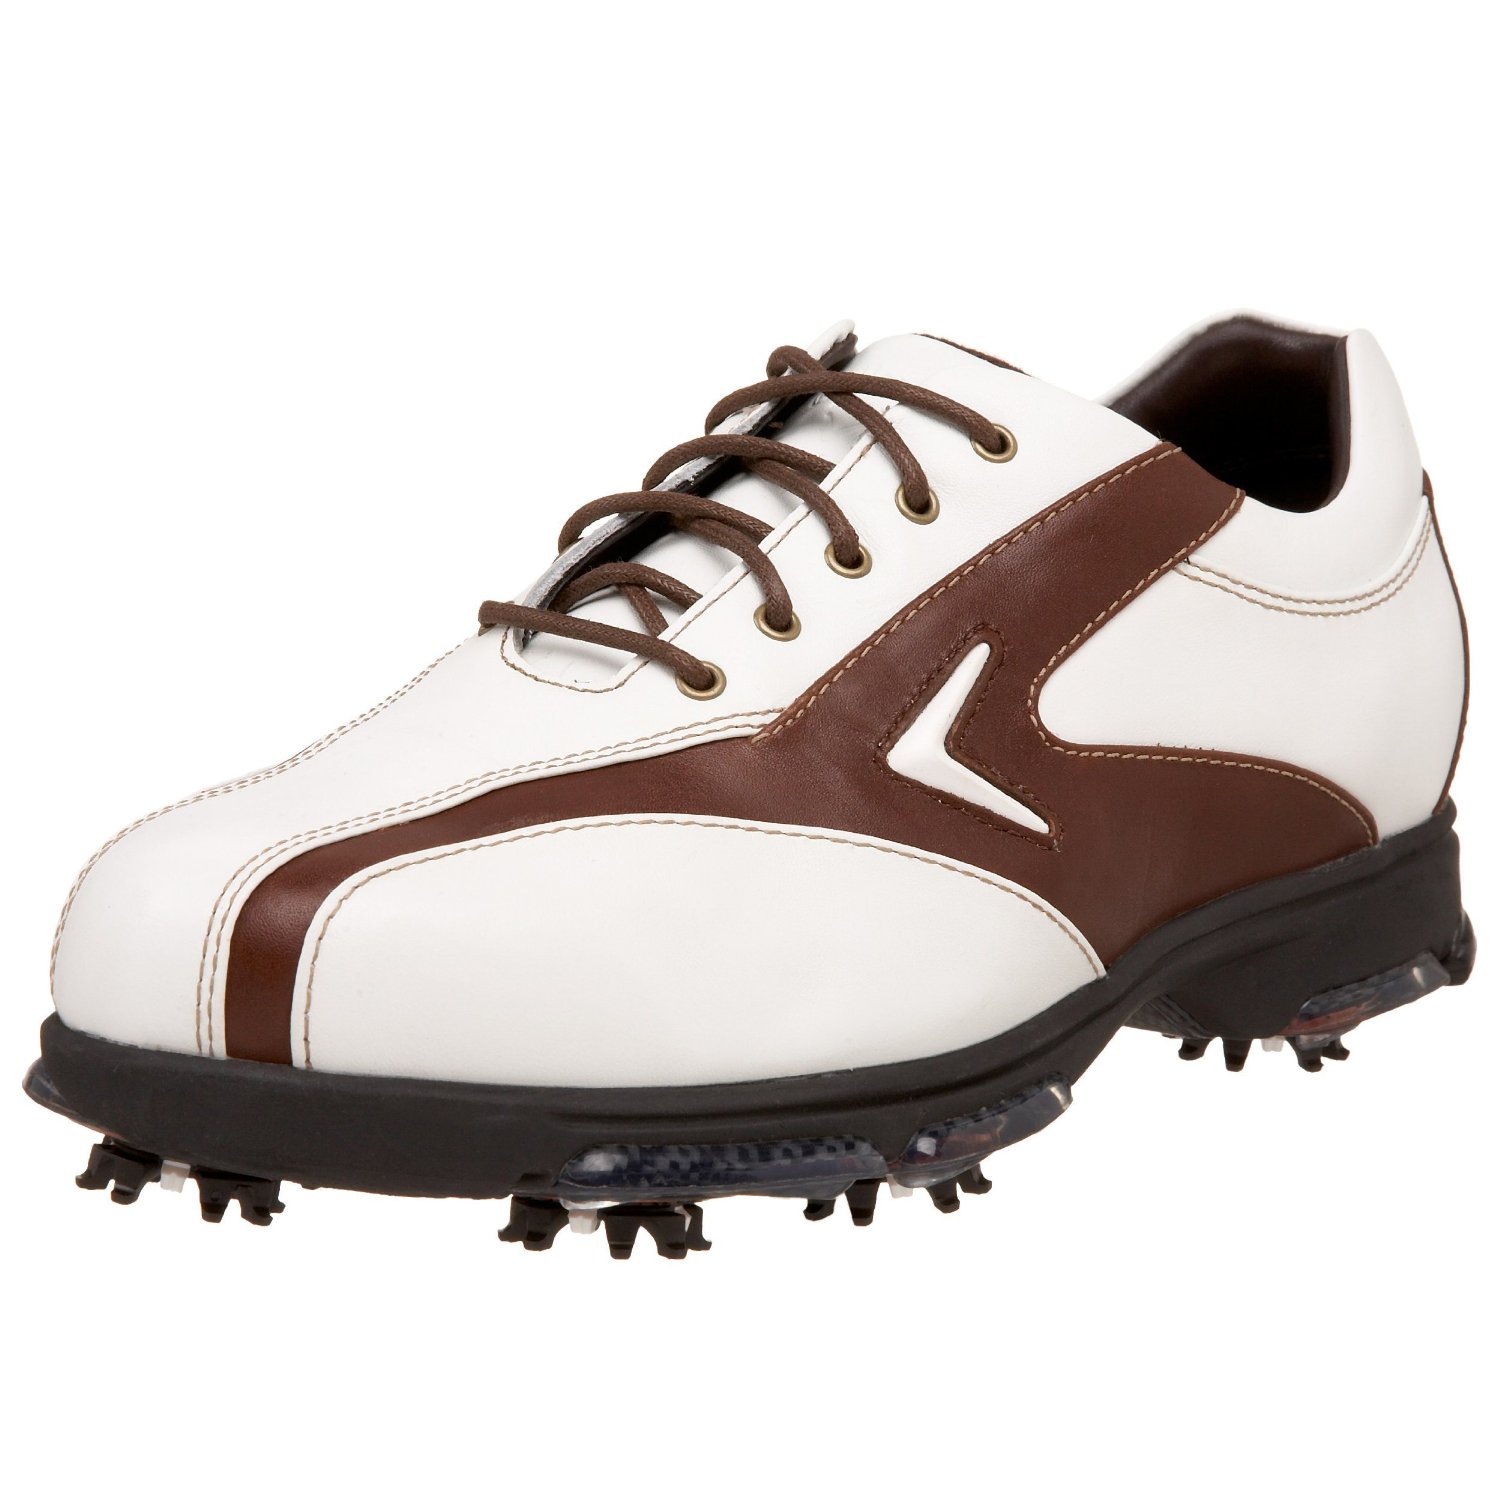 Golf shoes stores